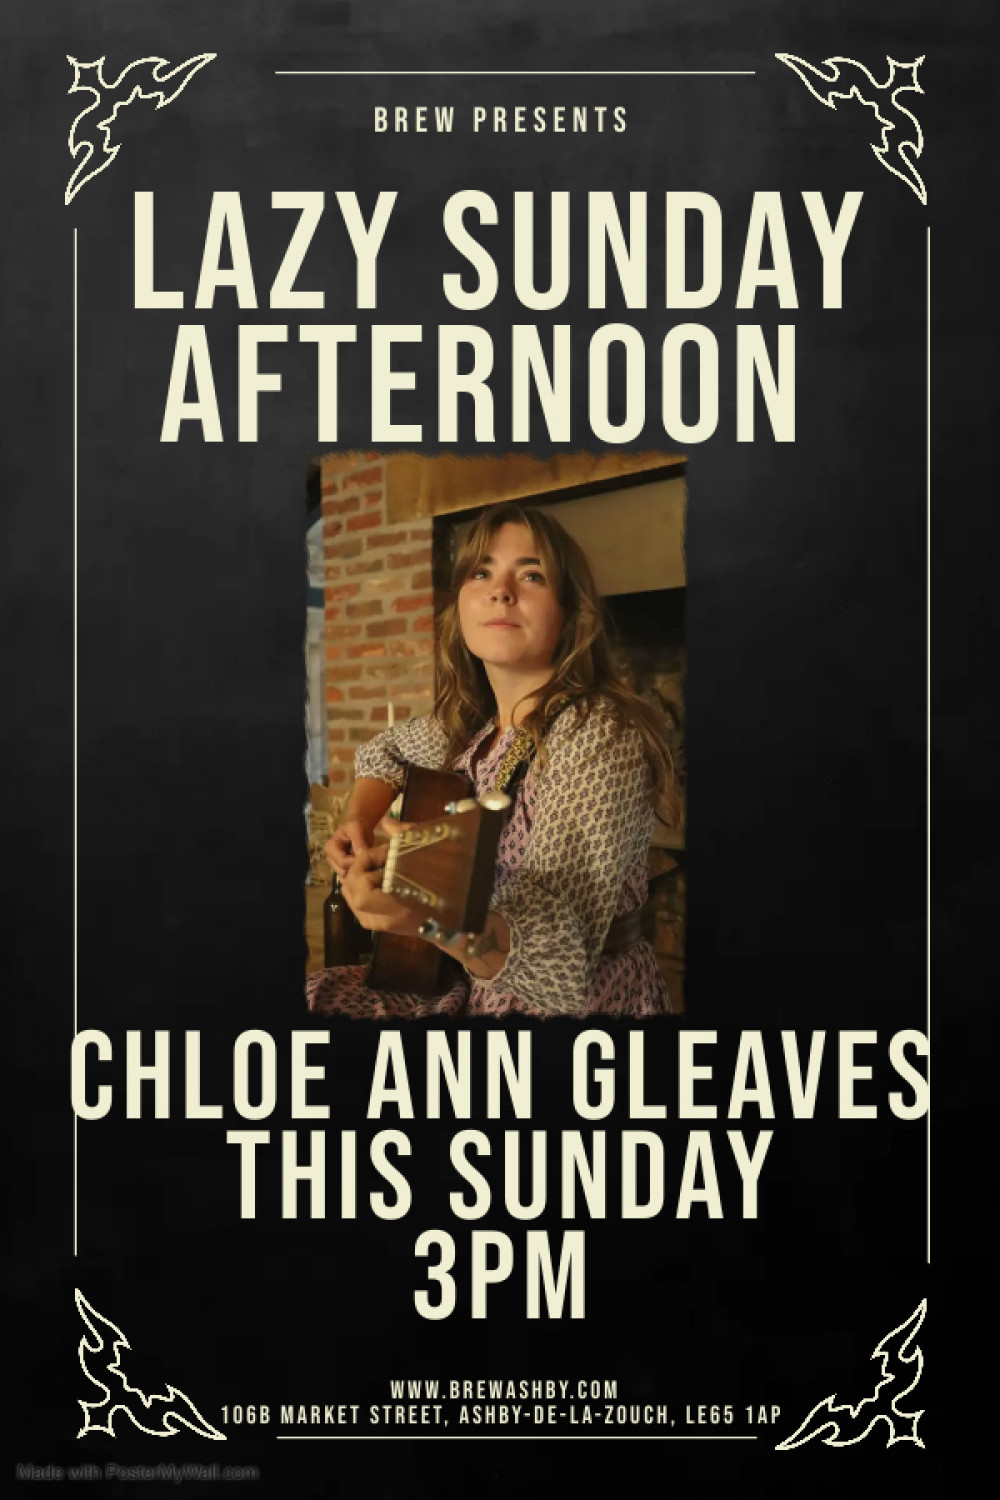 Lazy Sunday Afternoon Acoustic Session with Chloe Ann Gleaves at Brew, 106B Market Street, Ashby-de-la-Zouch